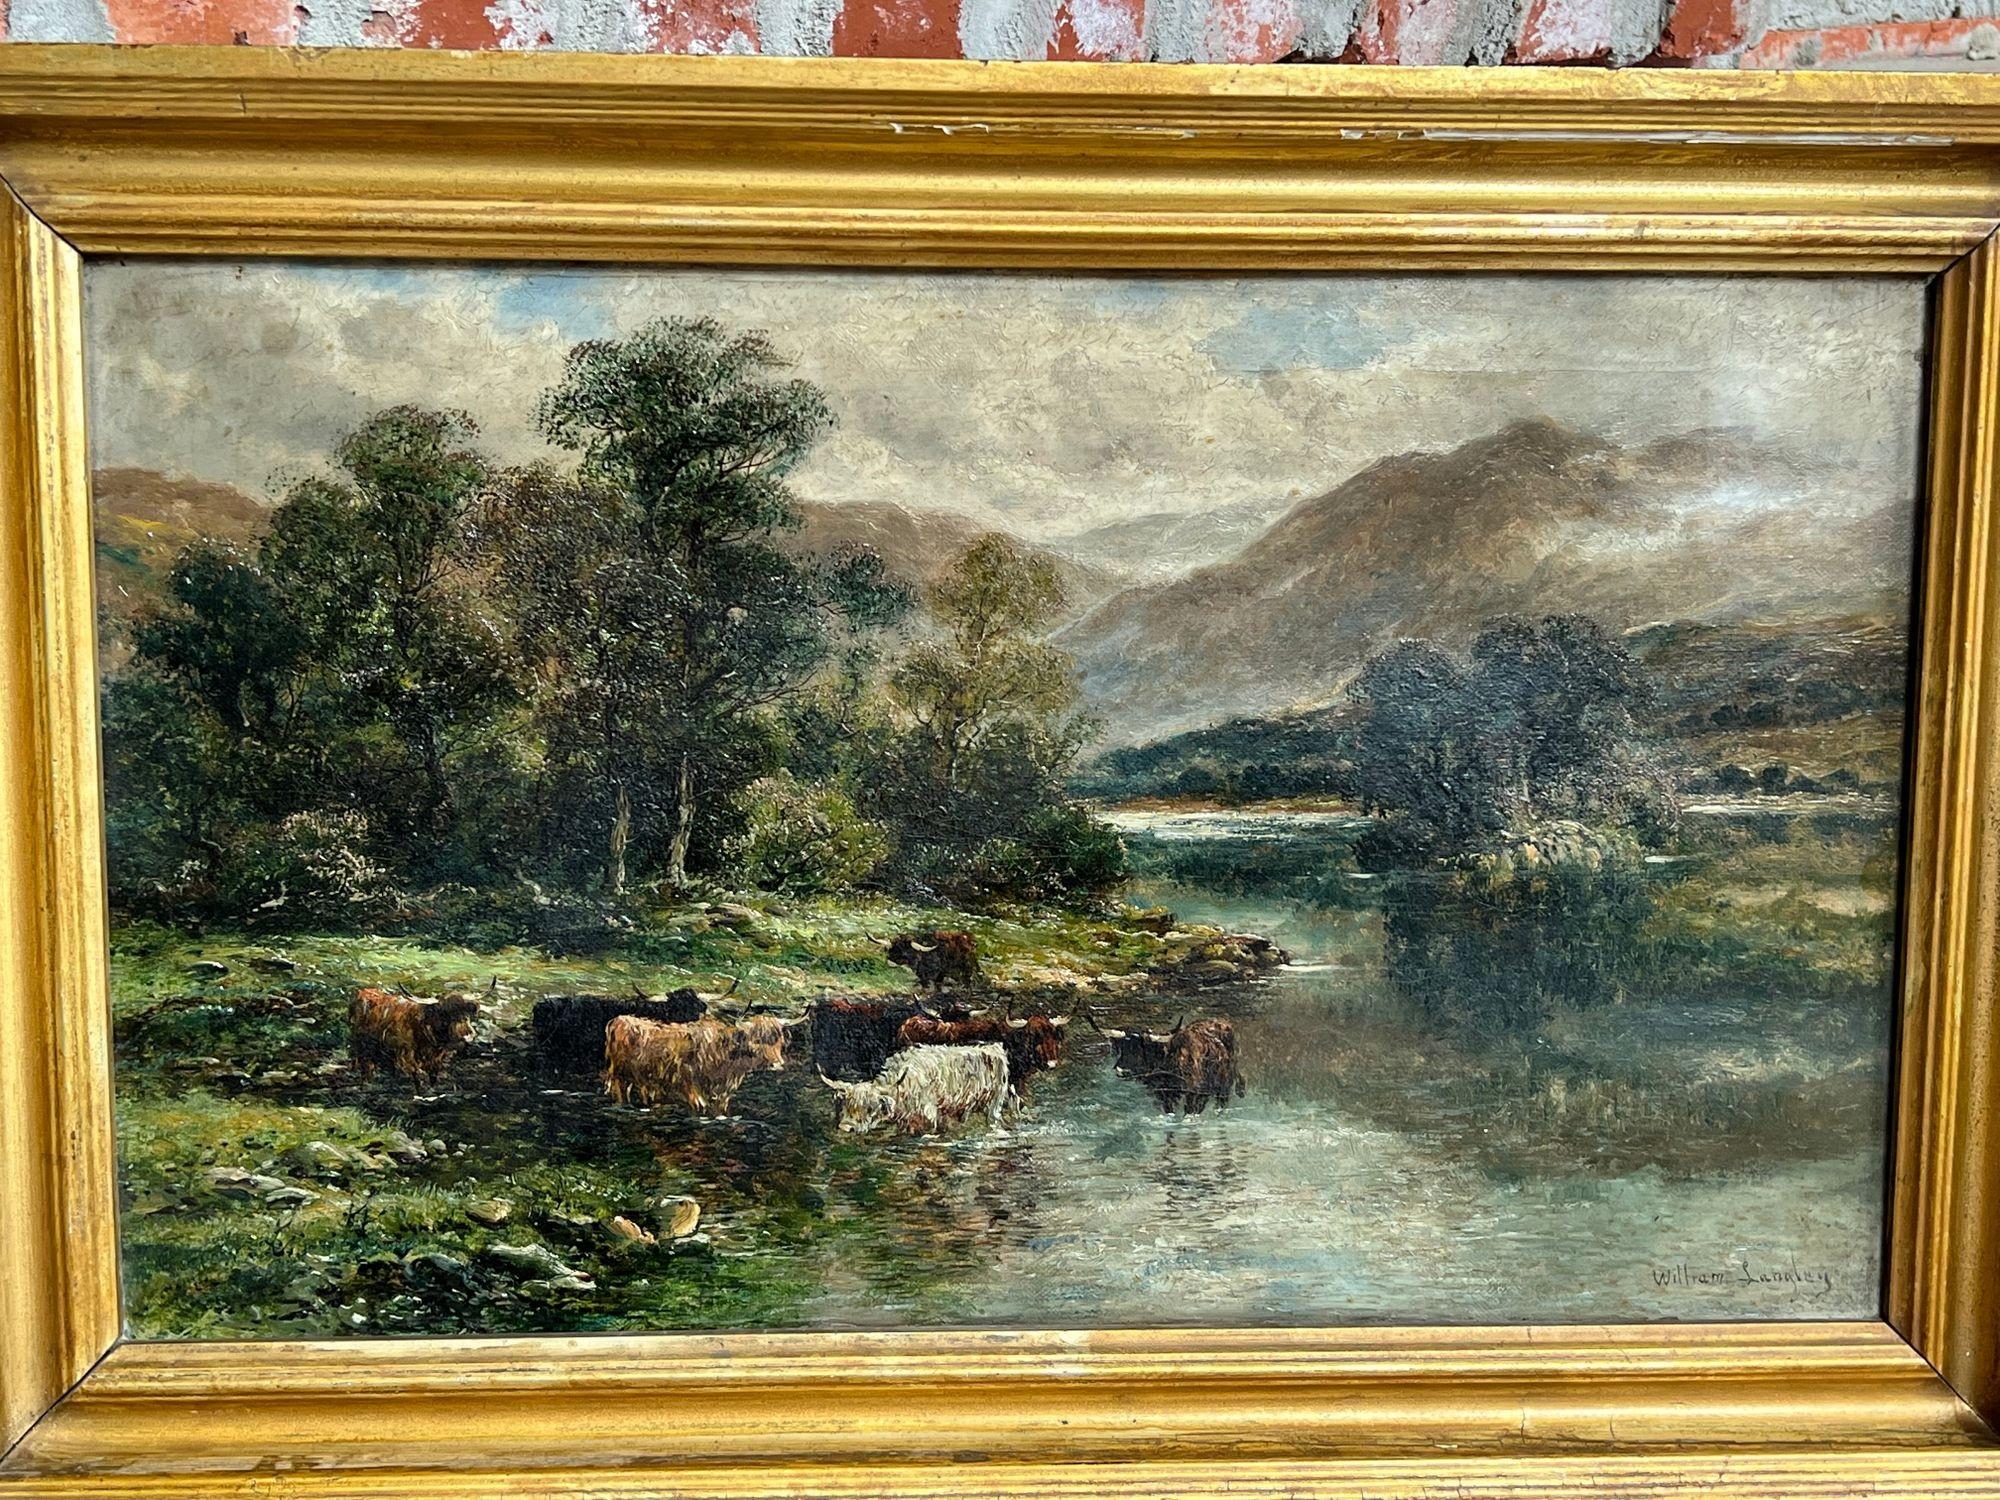 Romantic 19th Century English Oil Painting Highland Cattle Lake on Canvas Wm Langley